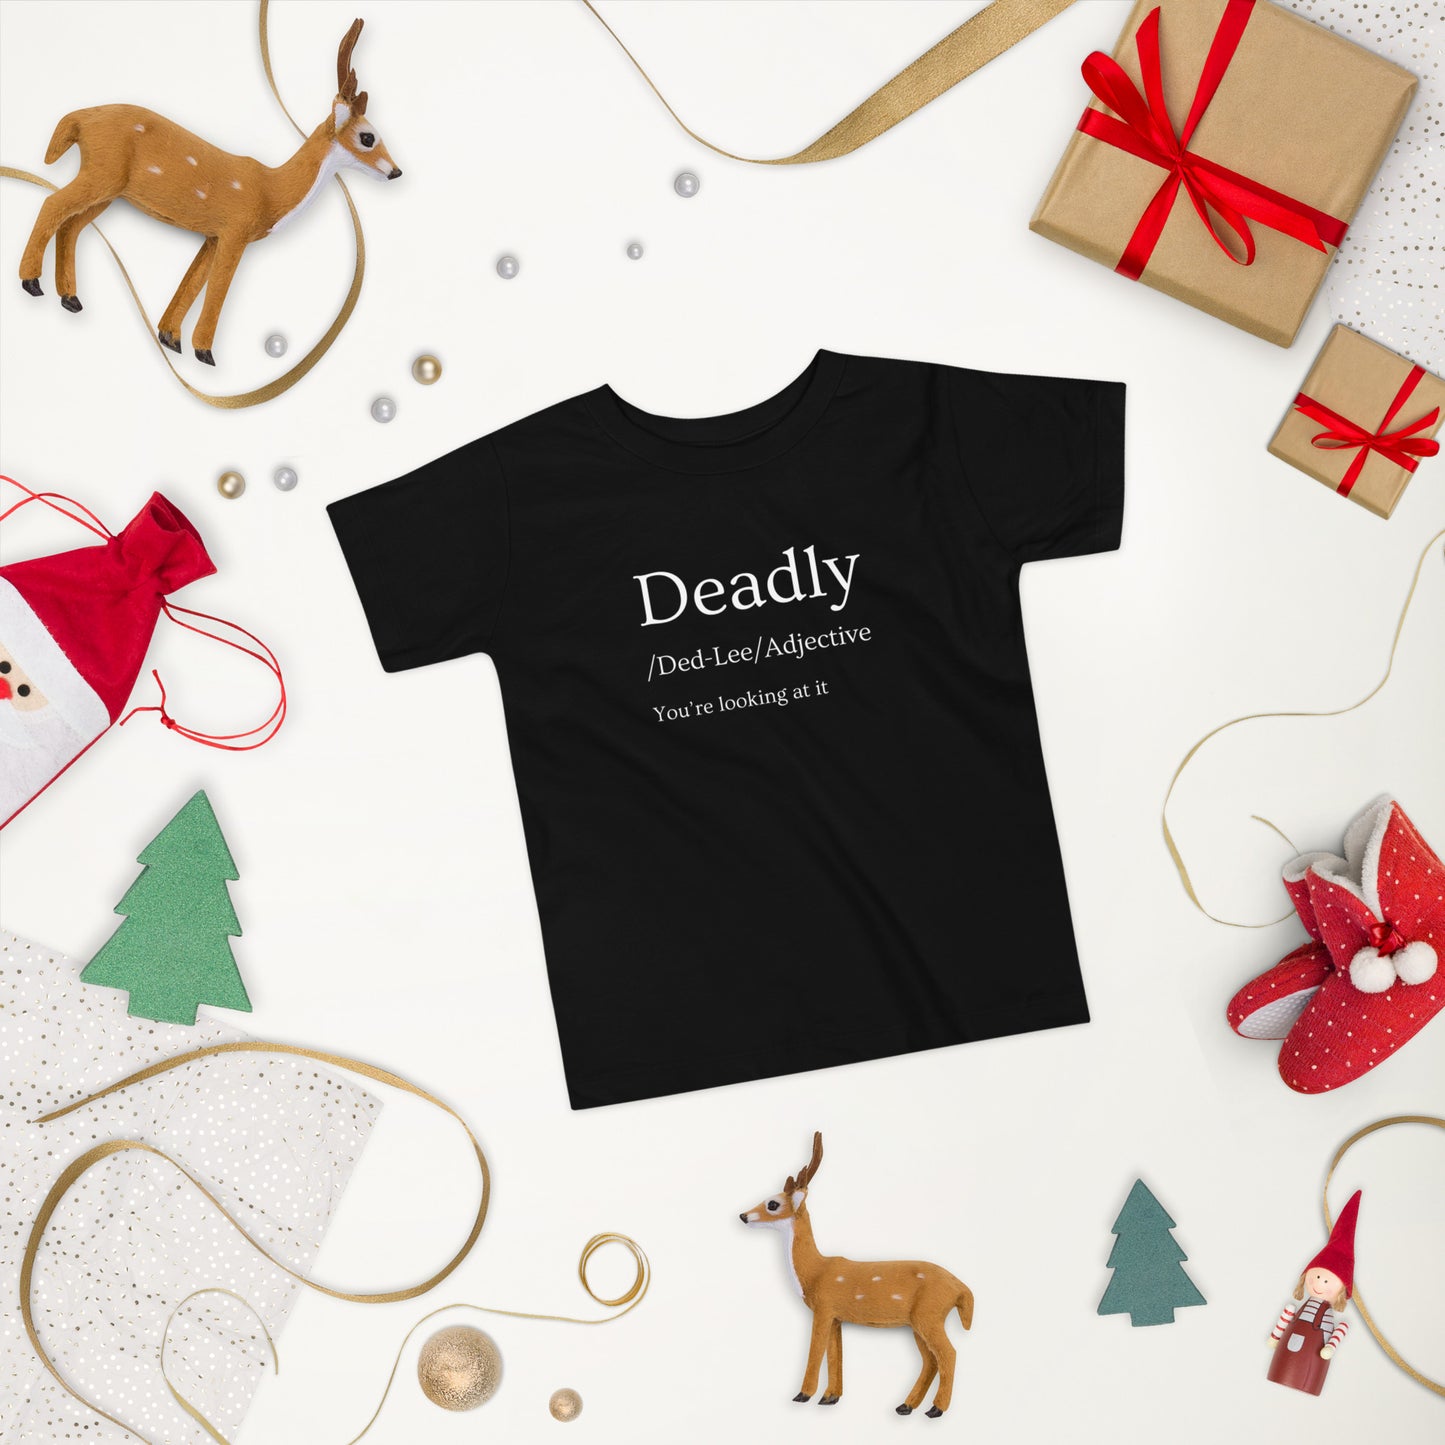 Definition of Deadly Toddler Short Sleeve Tee